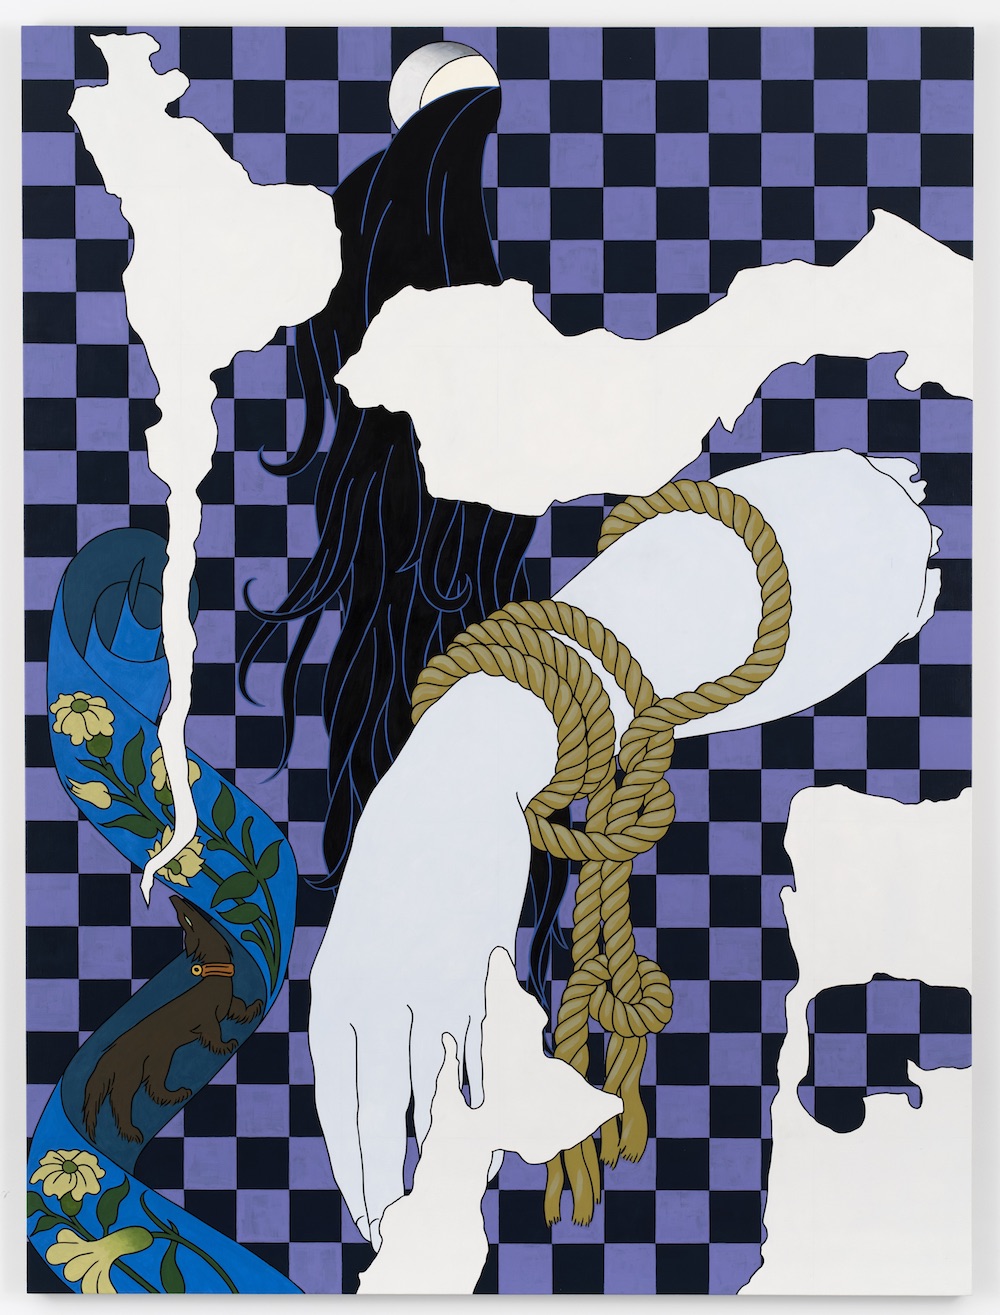 An acrylic painting depicts abstracted white shapes, a grey hand, a blue scarf, flowing black hair, and gold rope overlaid on a purple-and-black checkered background.